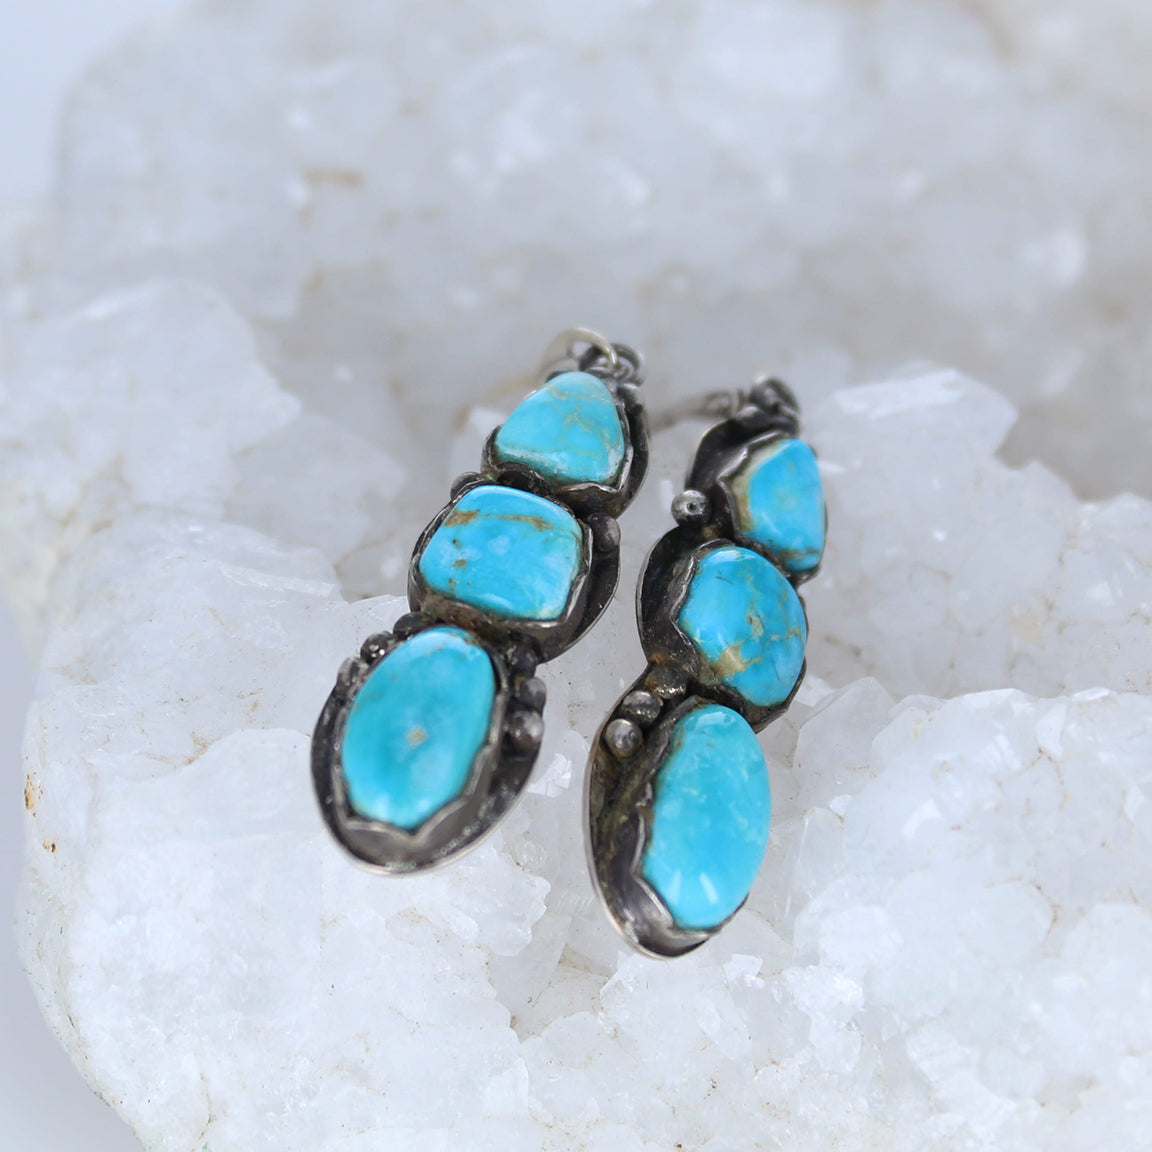 Sonoran Rose Turquoise 3 Stone Earrings Sterling Silver Unique Southwest